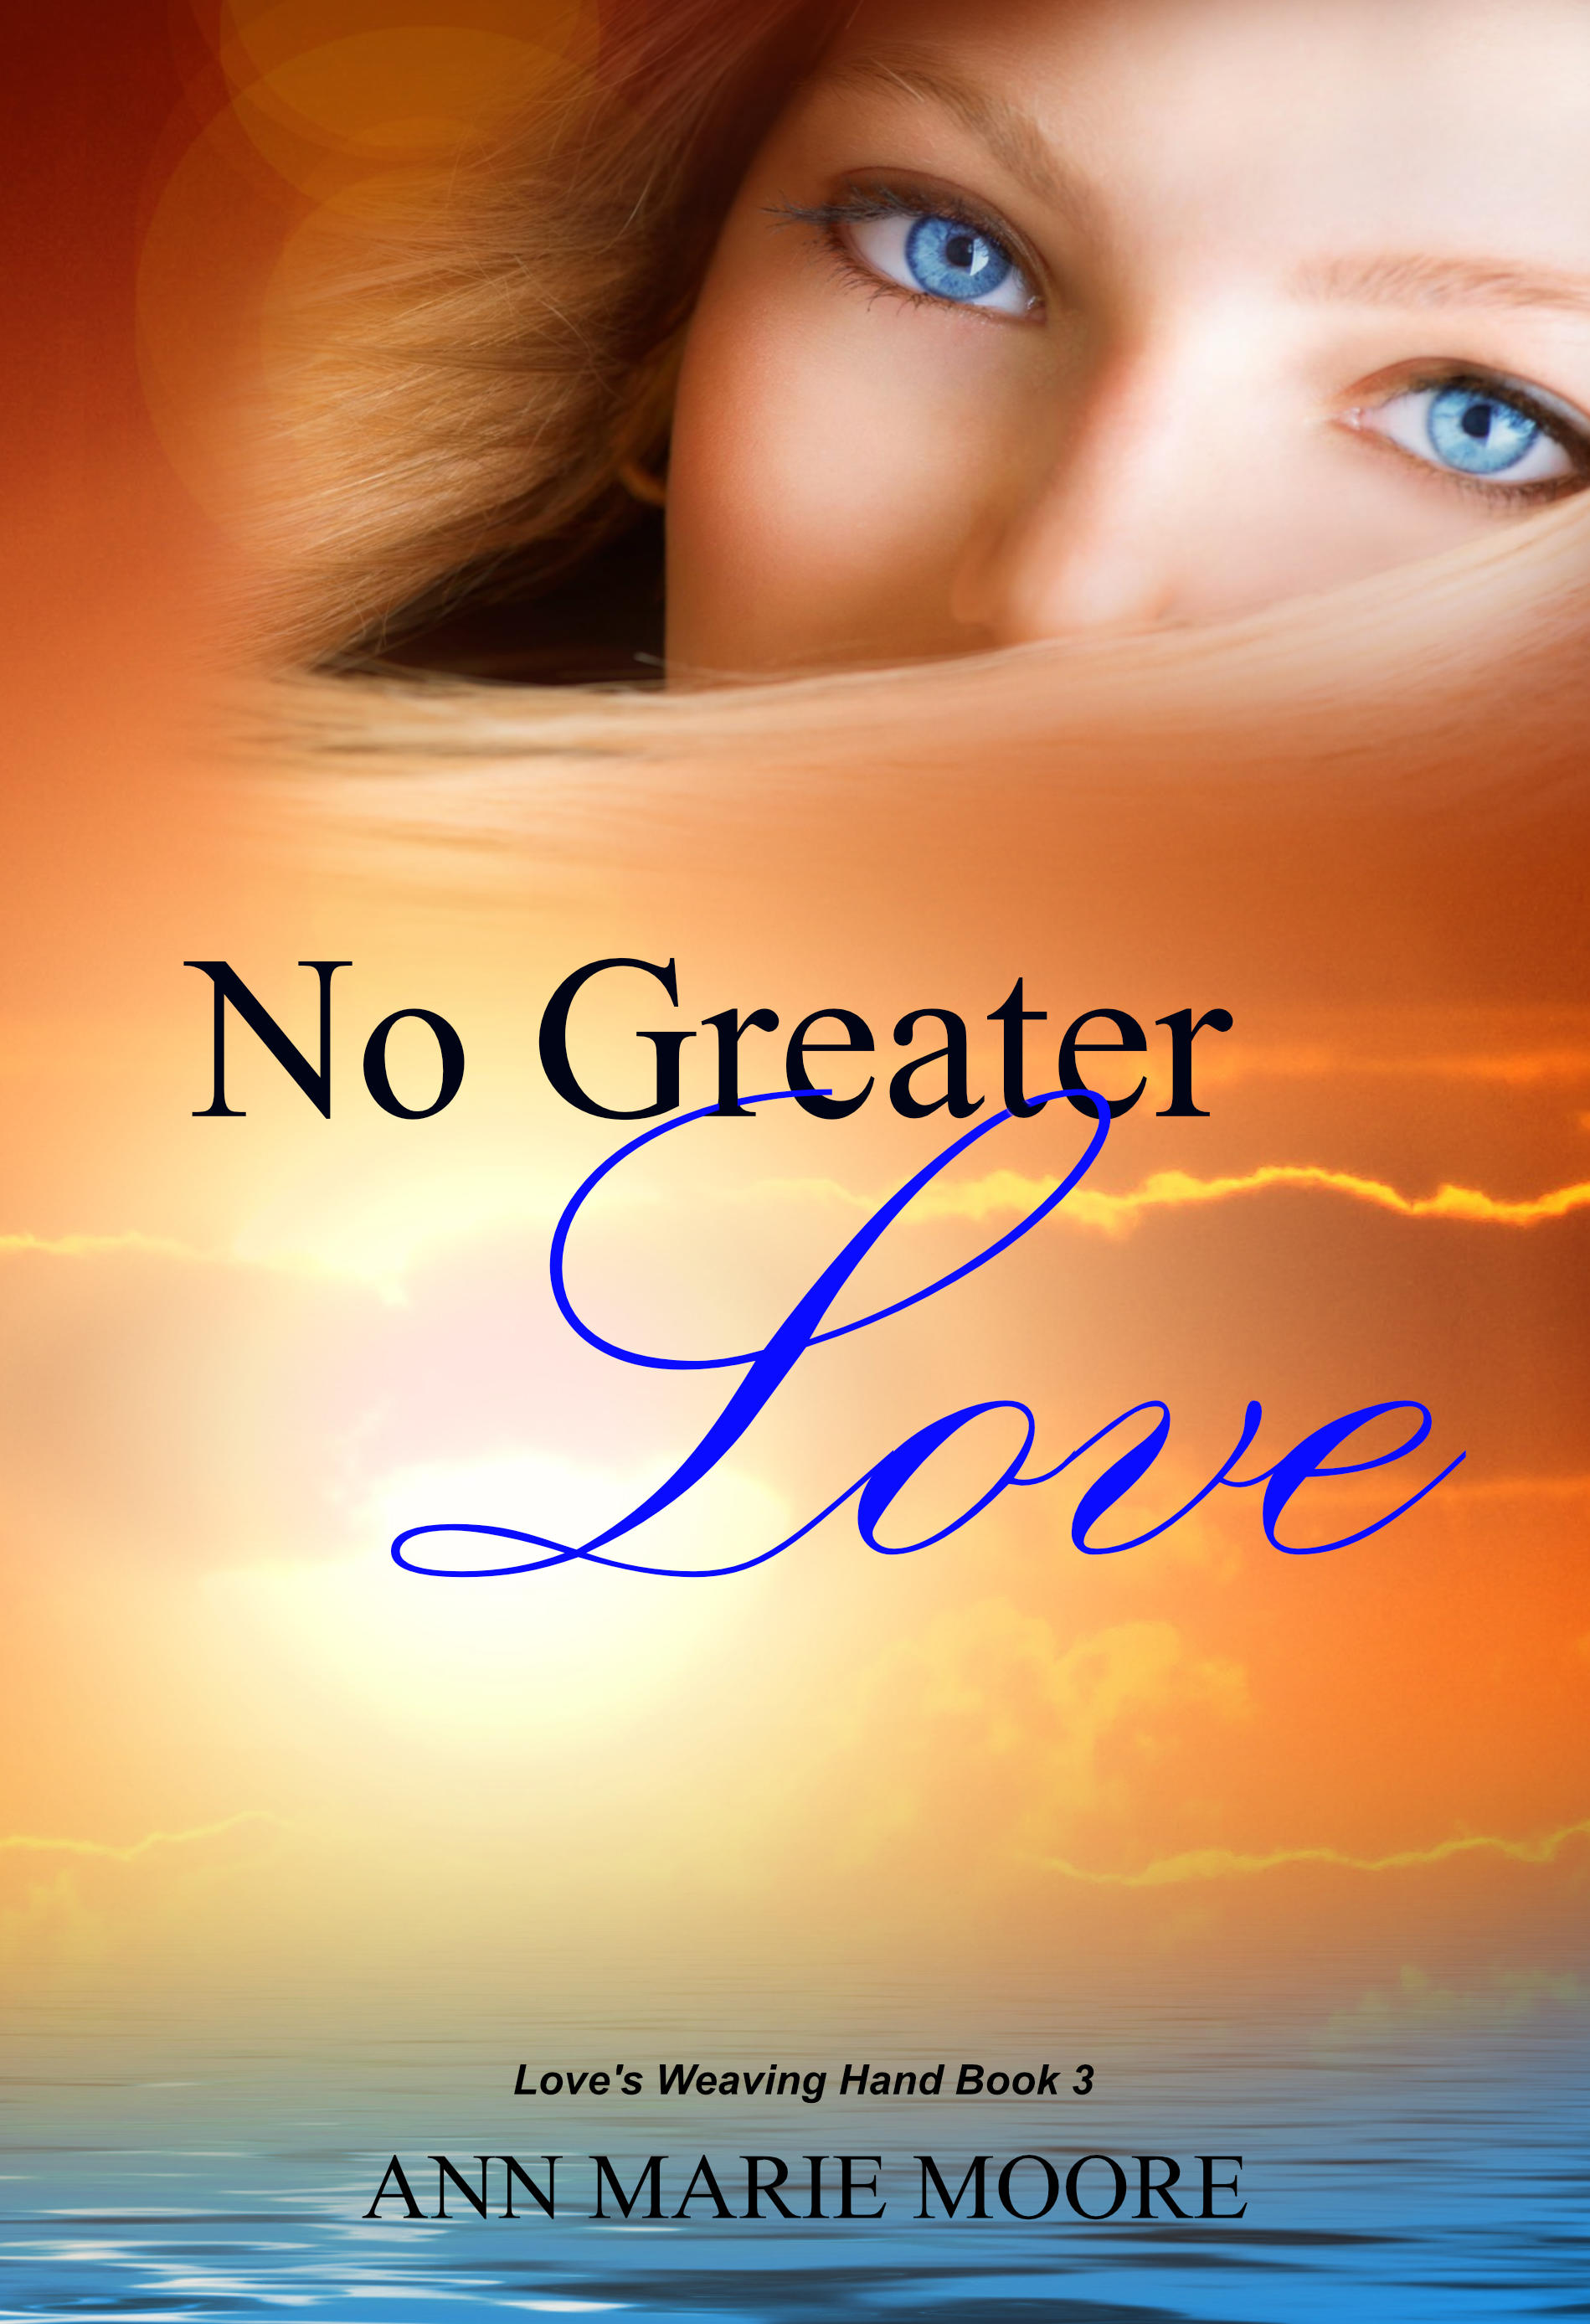 No Greater Love by Ann Marie Moore Love's Weaving Hand Series Book 3 LWH series